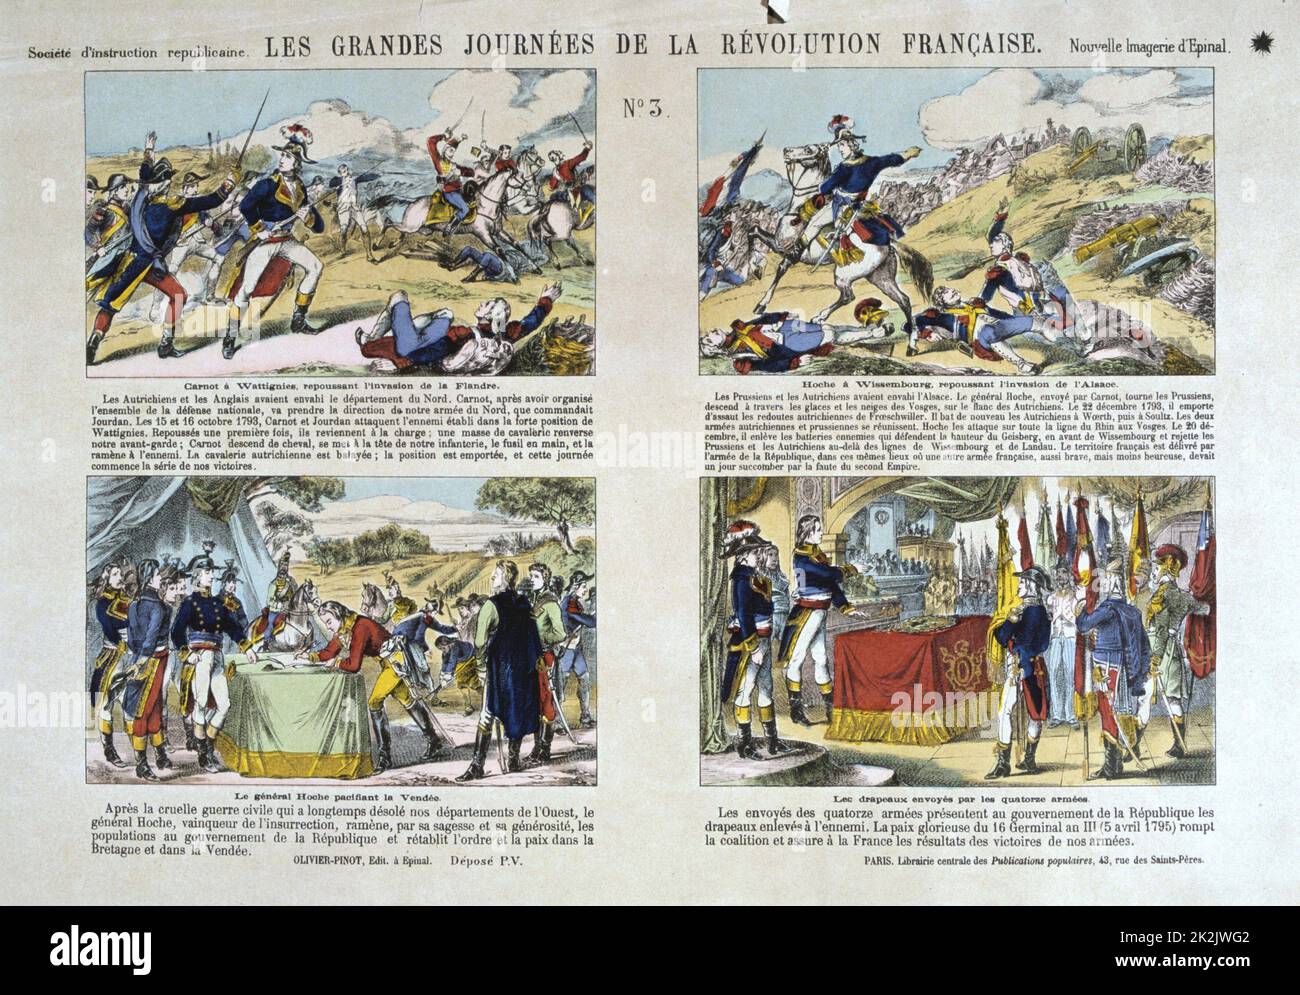 The Imageries d'Epinal. Plate #3 Illustrations of the main events of the French Revolution. - 15-16 October 1793: Lazare Carnot repels the Austrian and English troops at Wattignies. First victory for the revolutionary armies.  - December 1793: General Hoche liberates Alsace. Here the Battle of Wissembourg. - 1795: under the auspices of General Hoche, agreements were signed with the Vendée chiefs, putting an end to the First Vendée War.  - Peace of 16 Germinal An III (5 April 1795): the envoys of fourteen armies present to the Government of the Republic the flags taken from the enemy. Stock Photo